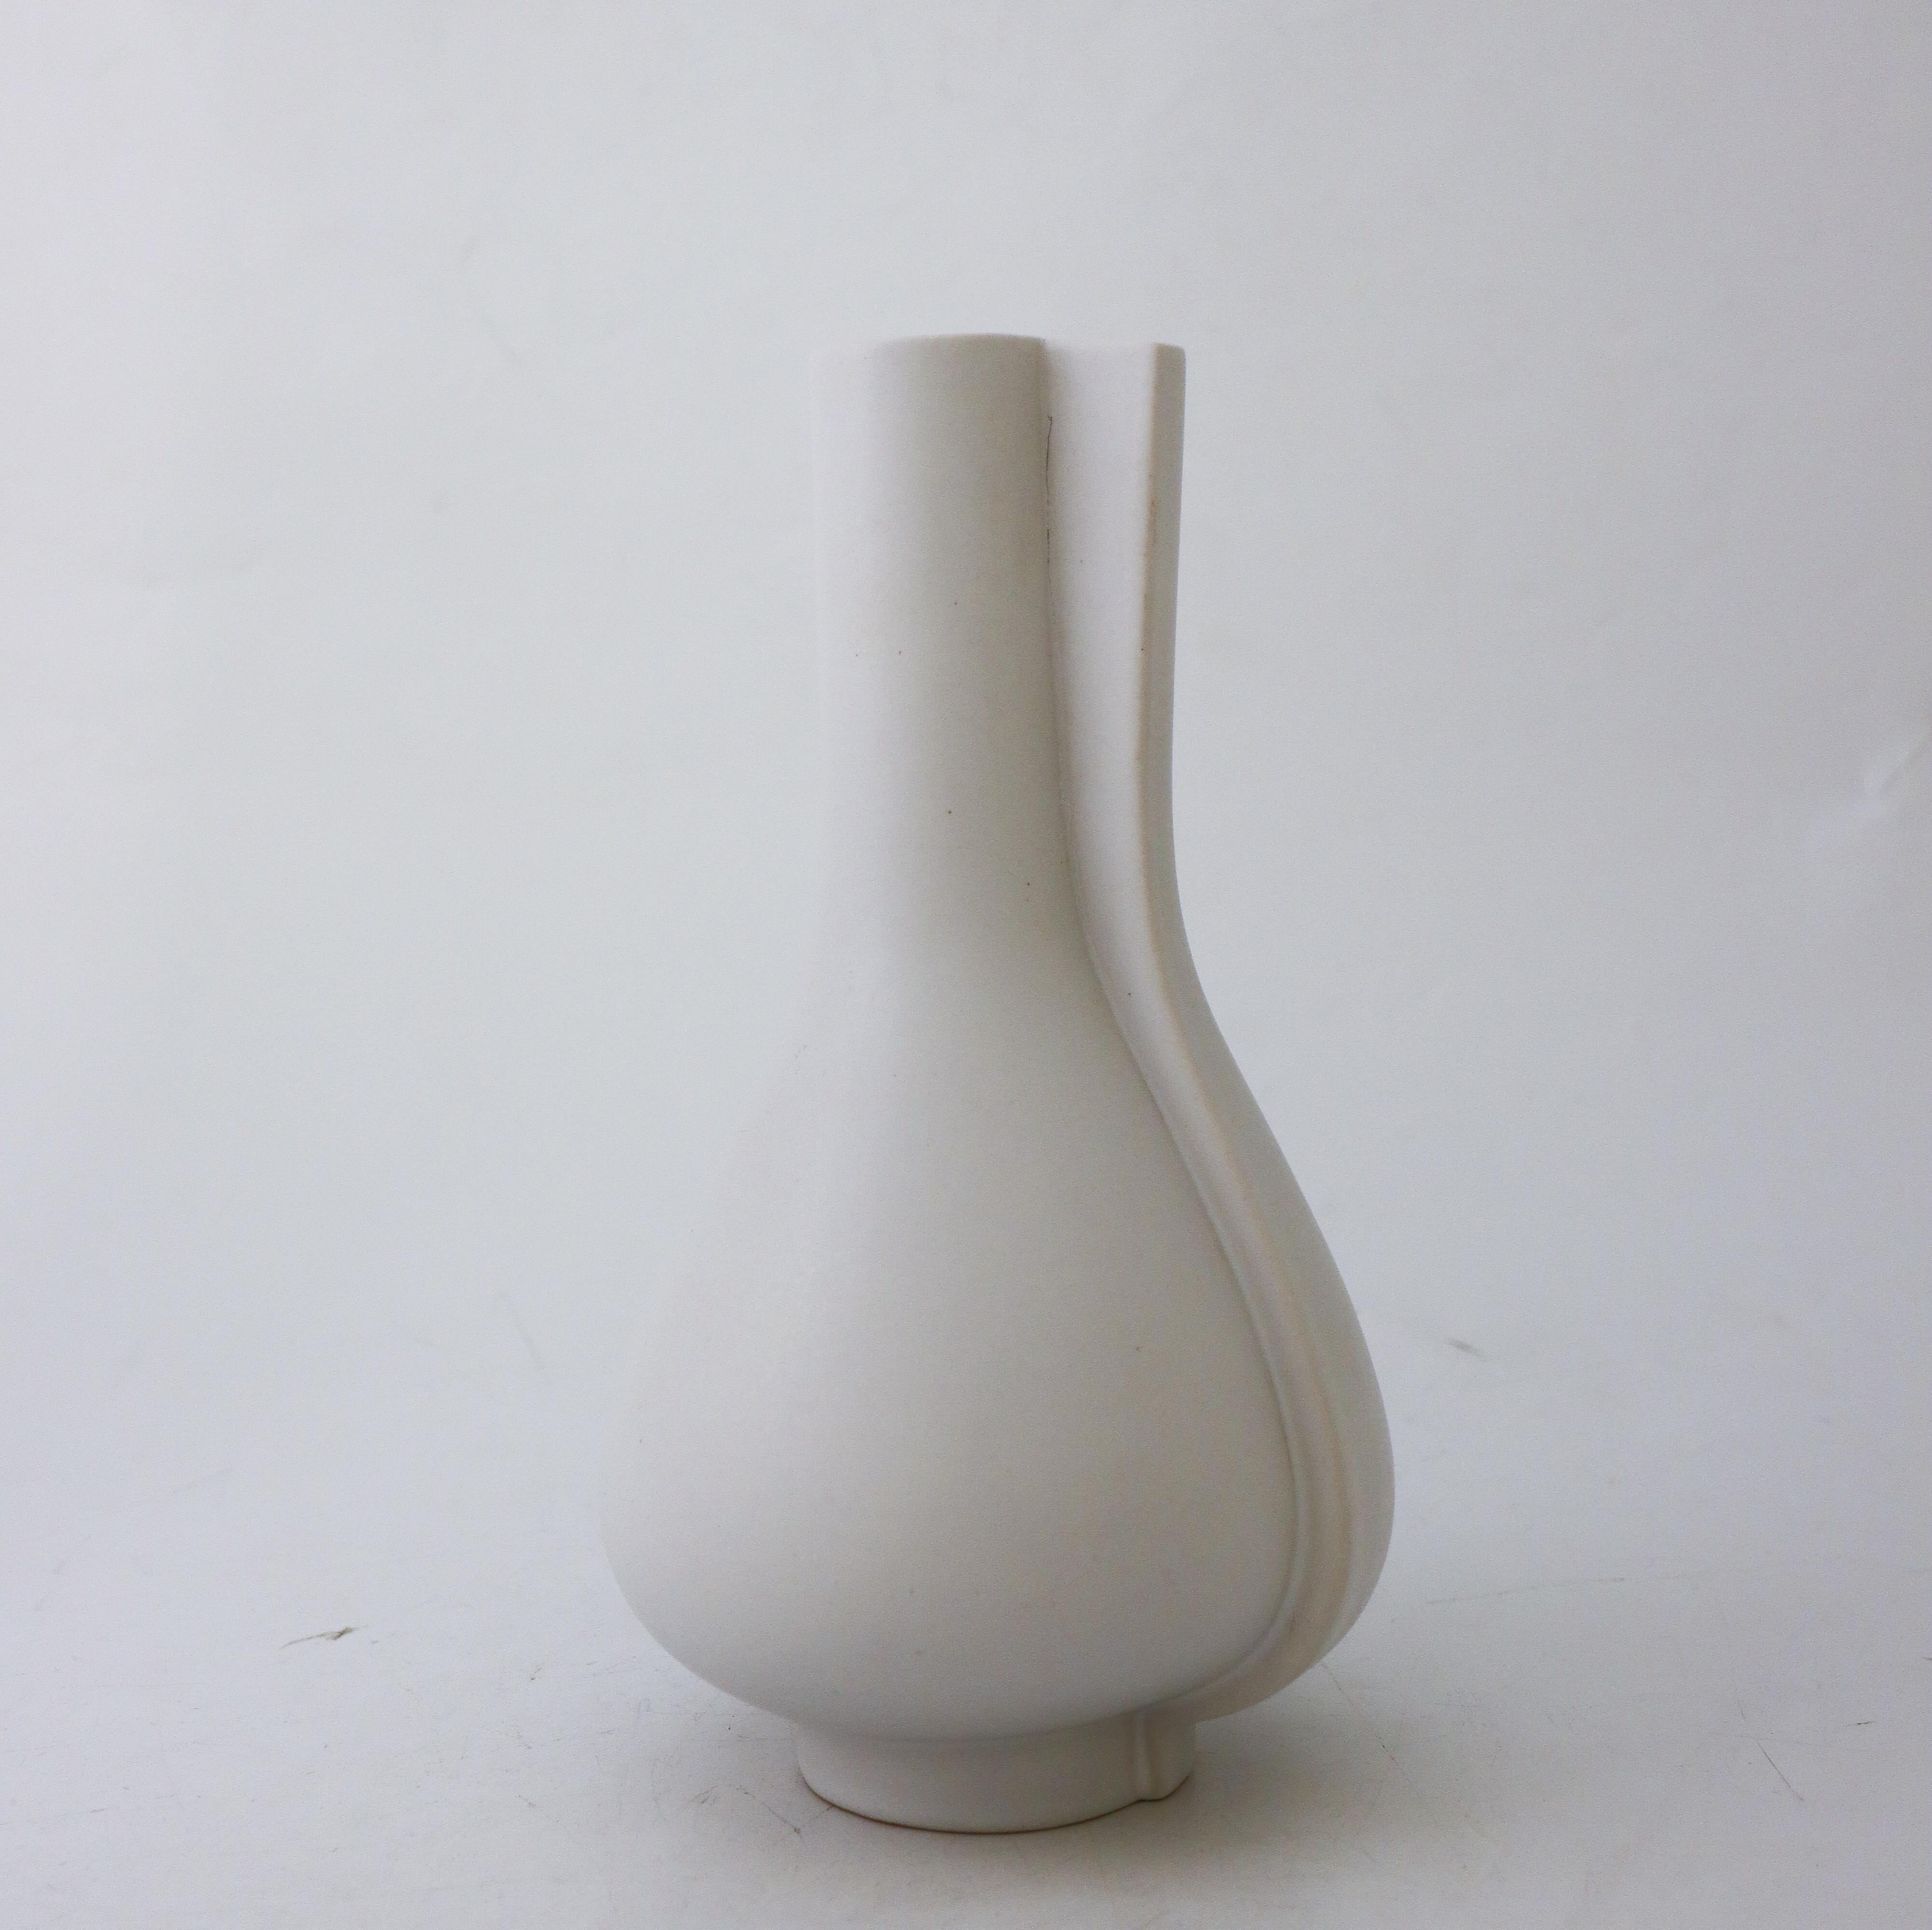 A lovely vase of model Surrea designed by Wilhelm Kåge at Gustavsberg in the 1940s. It is 23 cm high and in very good condition except from some minor scratches in the glaze. It is not marked, many of the surrea items is not marked. 

This is one of